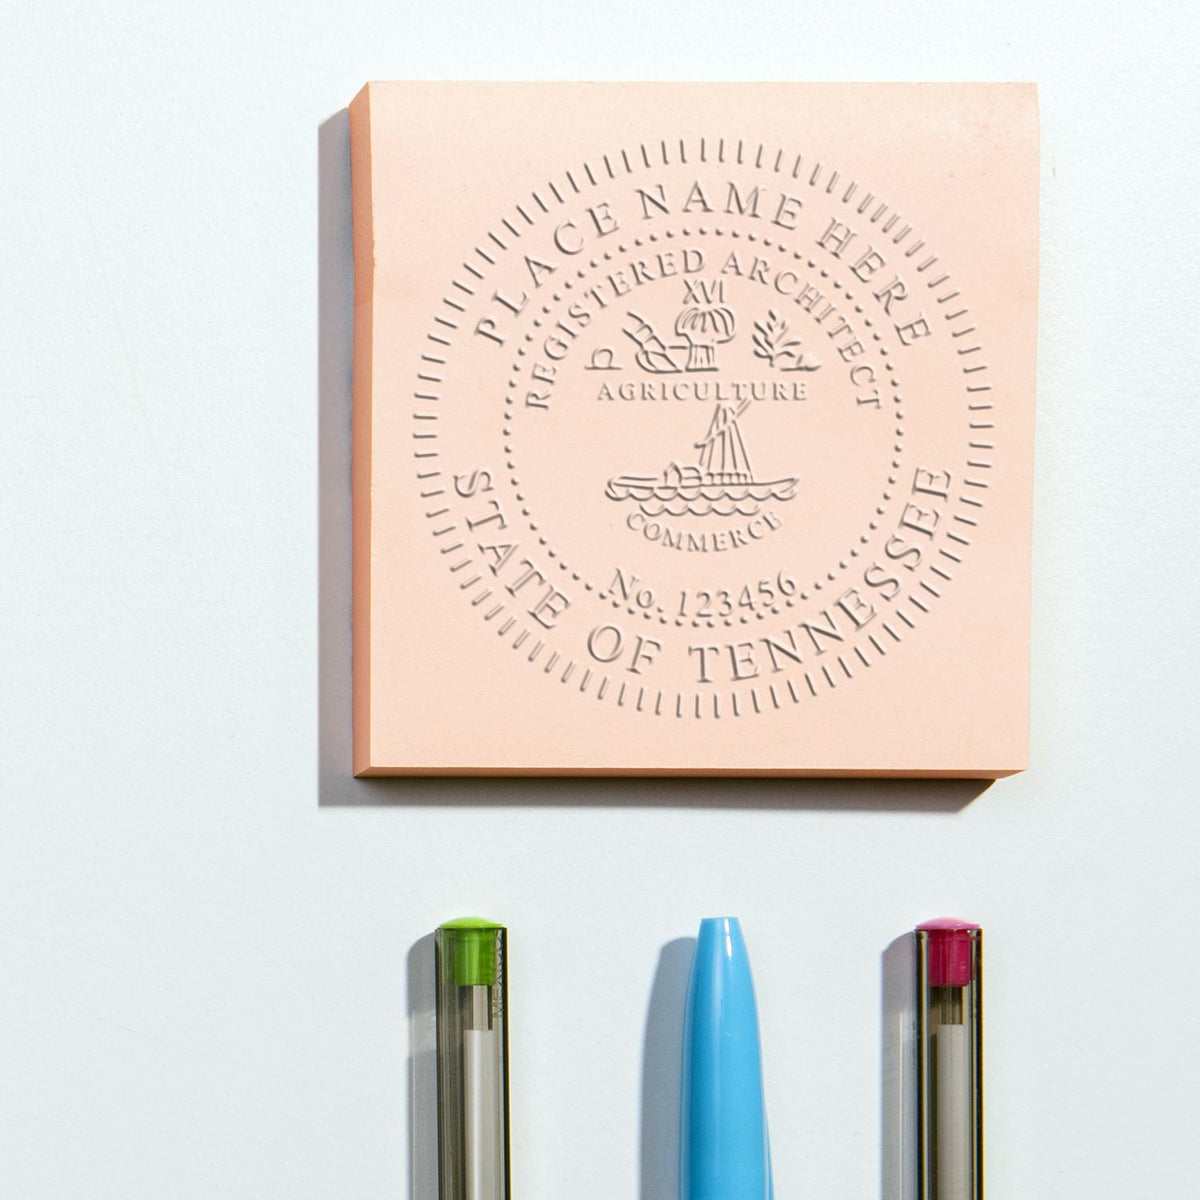 The Tennessee Desk Architect Embossing Seal stamp impression comes to life with a crisp, detailed photo on paper - showcasing true professional quality.